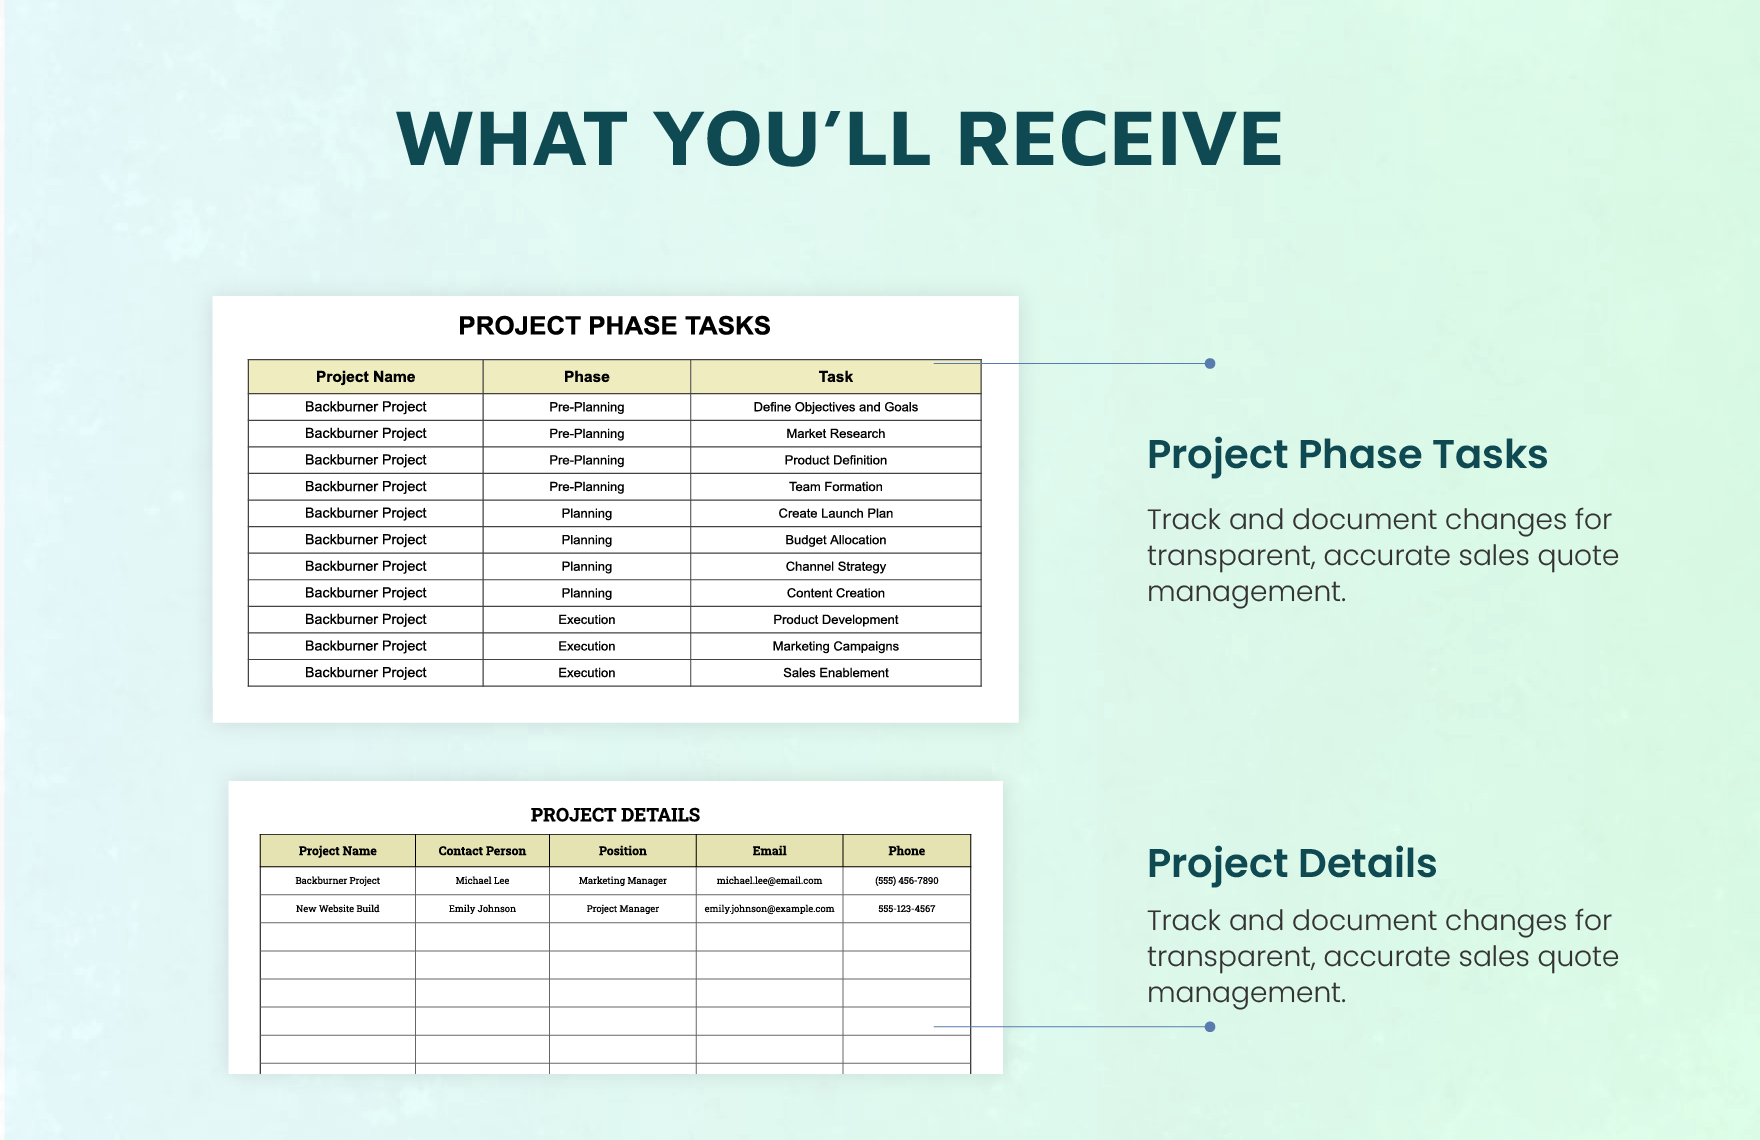 Product Launch Project Roadmap Template